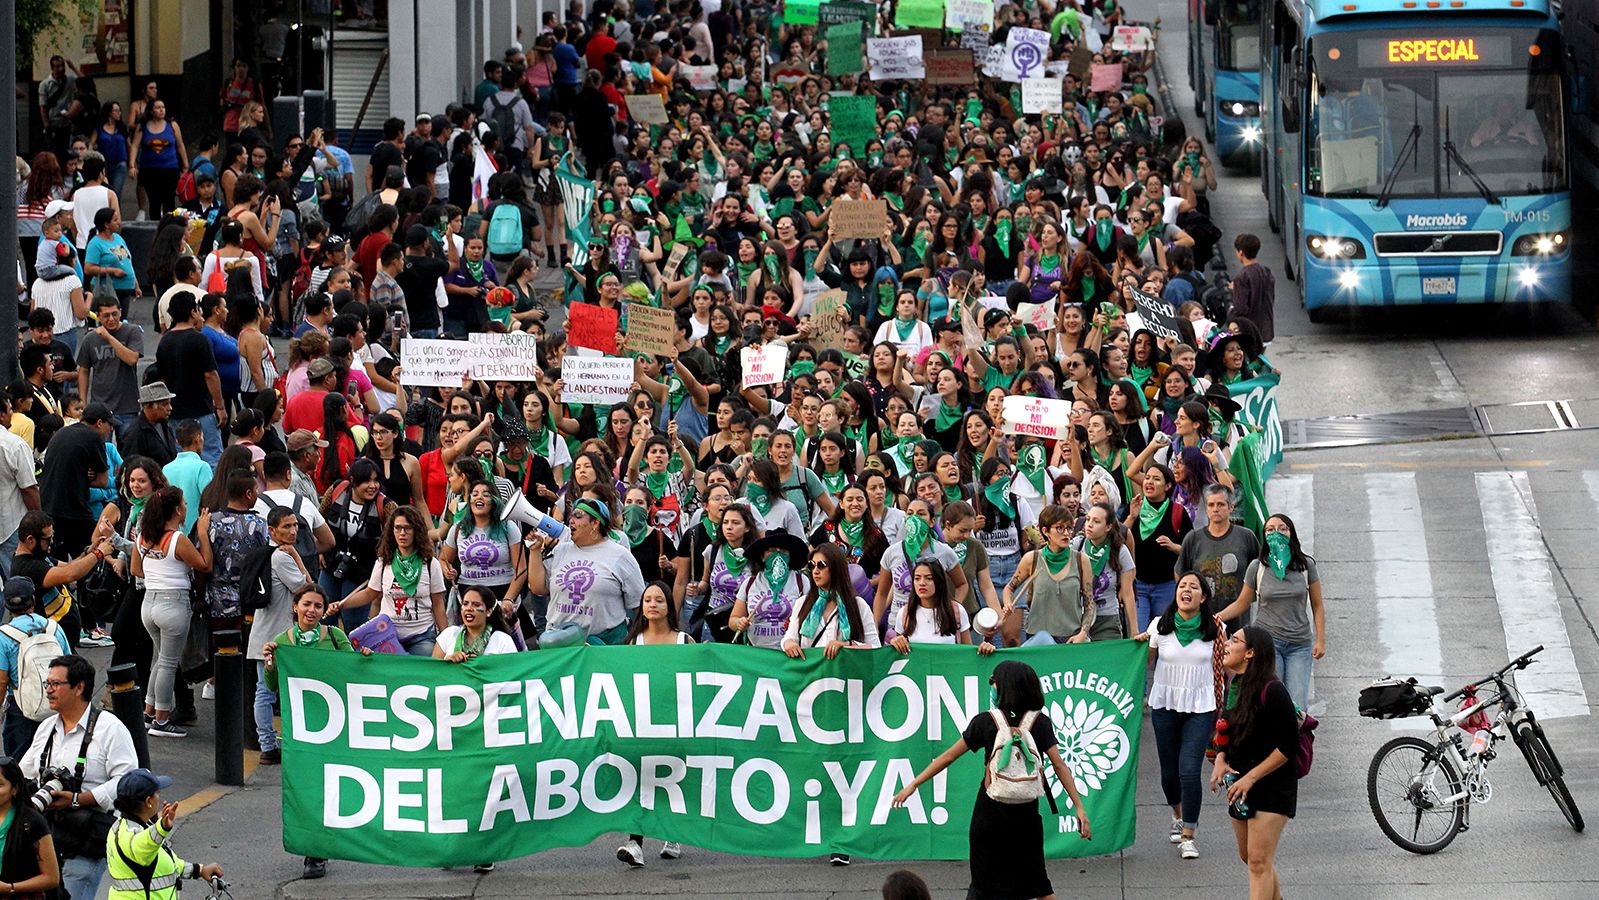 Activists supporting the decriminalization of abortion in Mexico march in Guadalajara, Mexico, on September 28, 2019.